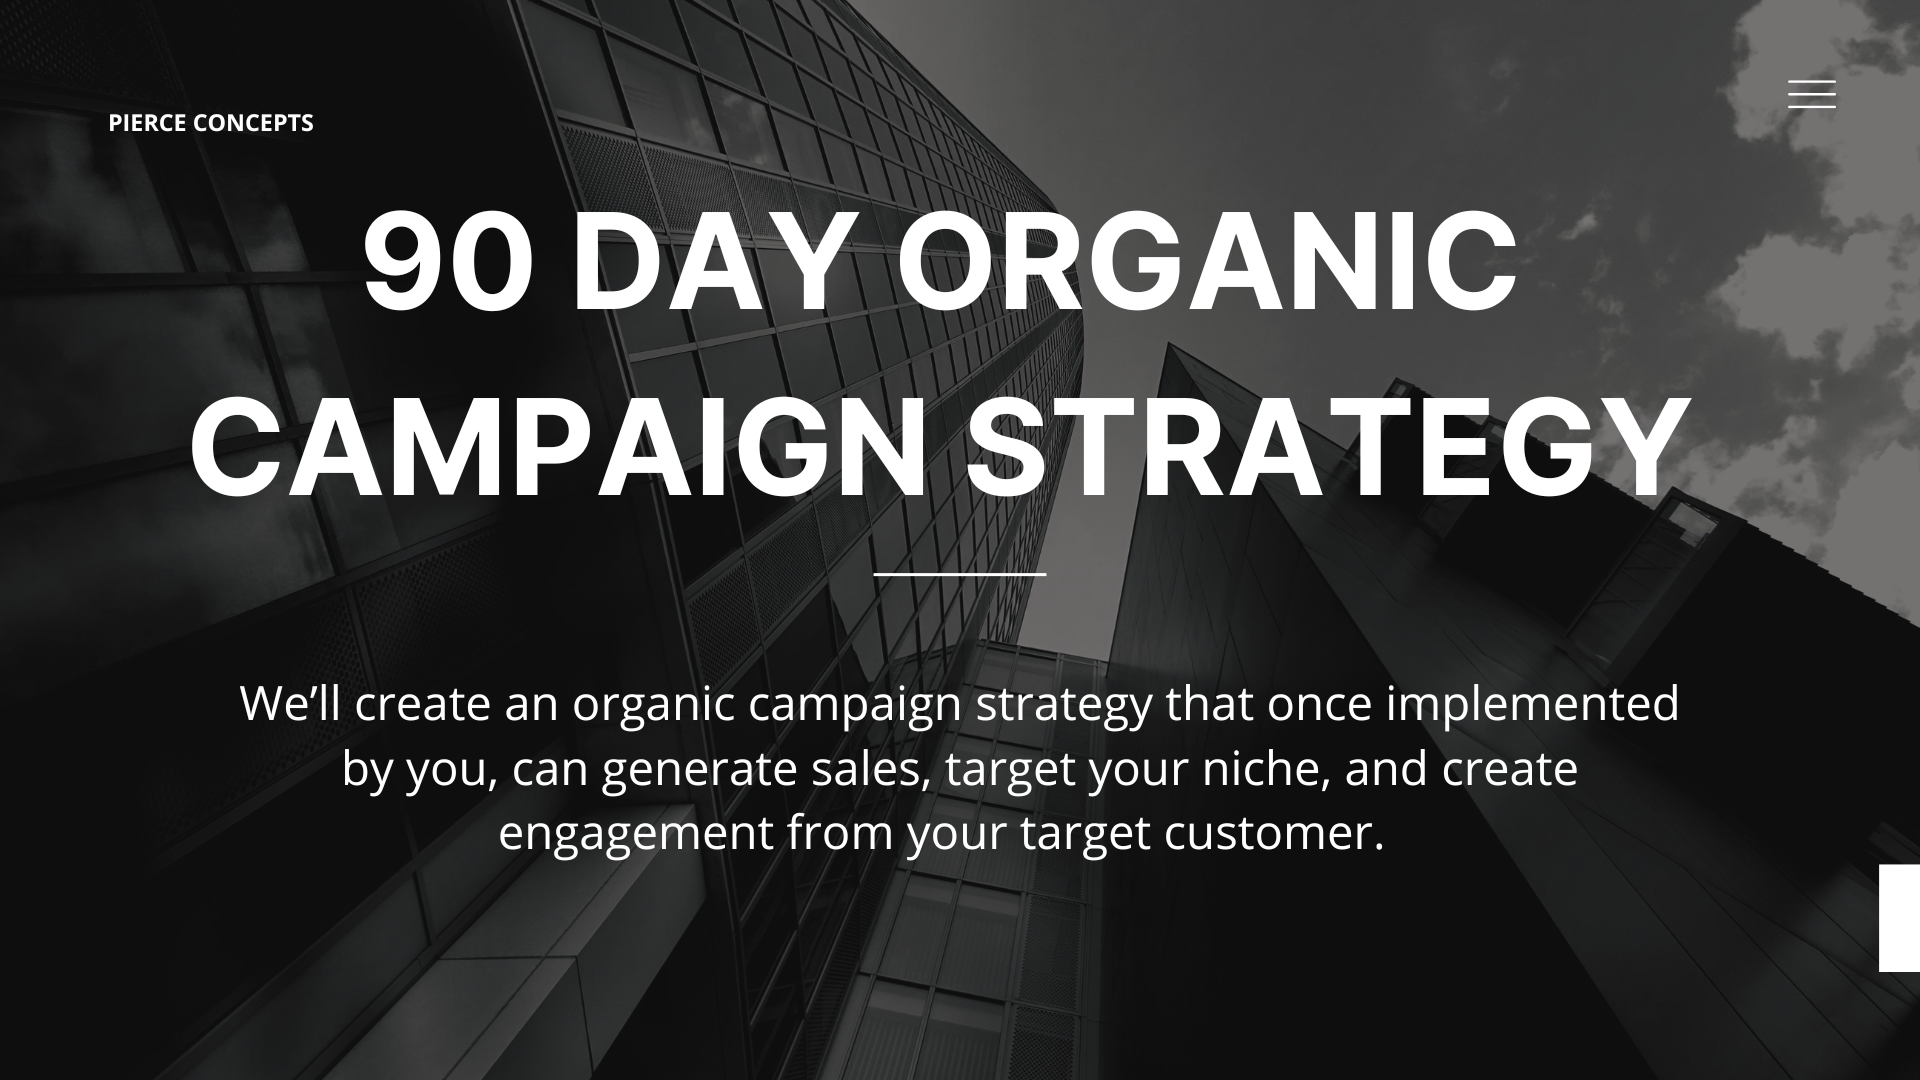 90 Day Organic Campaign Strategy